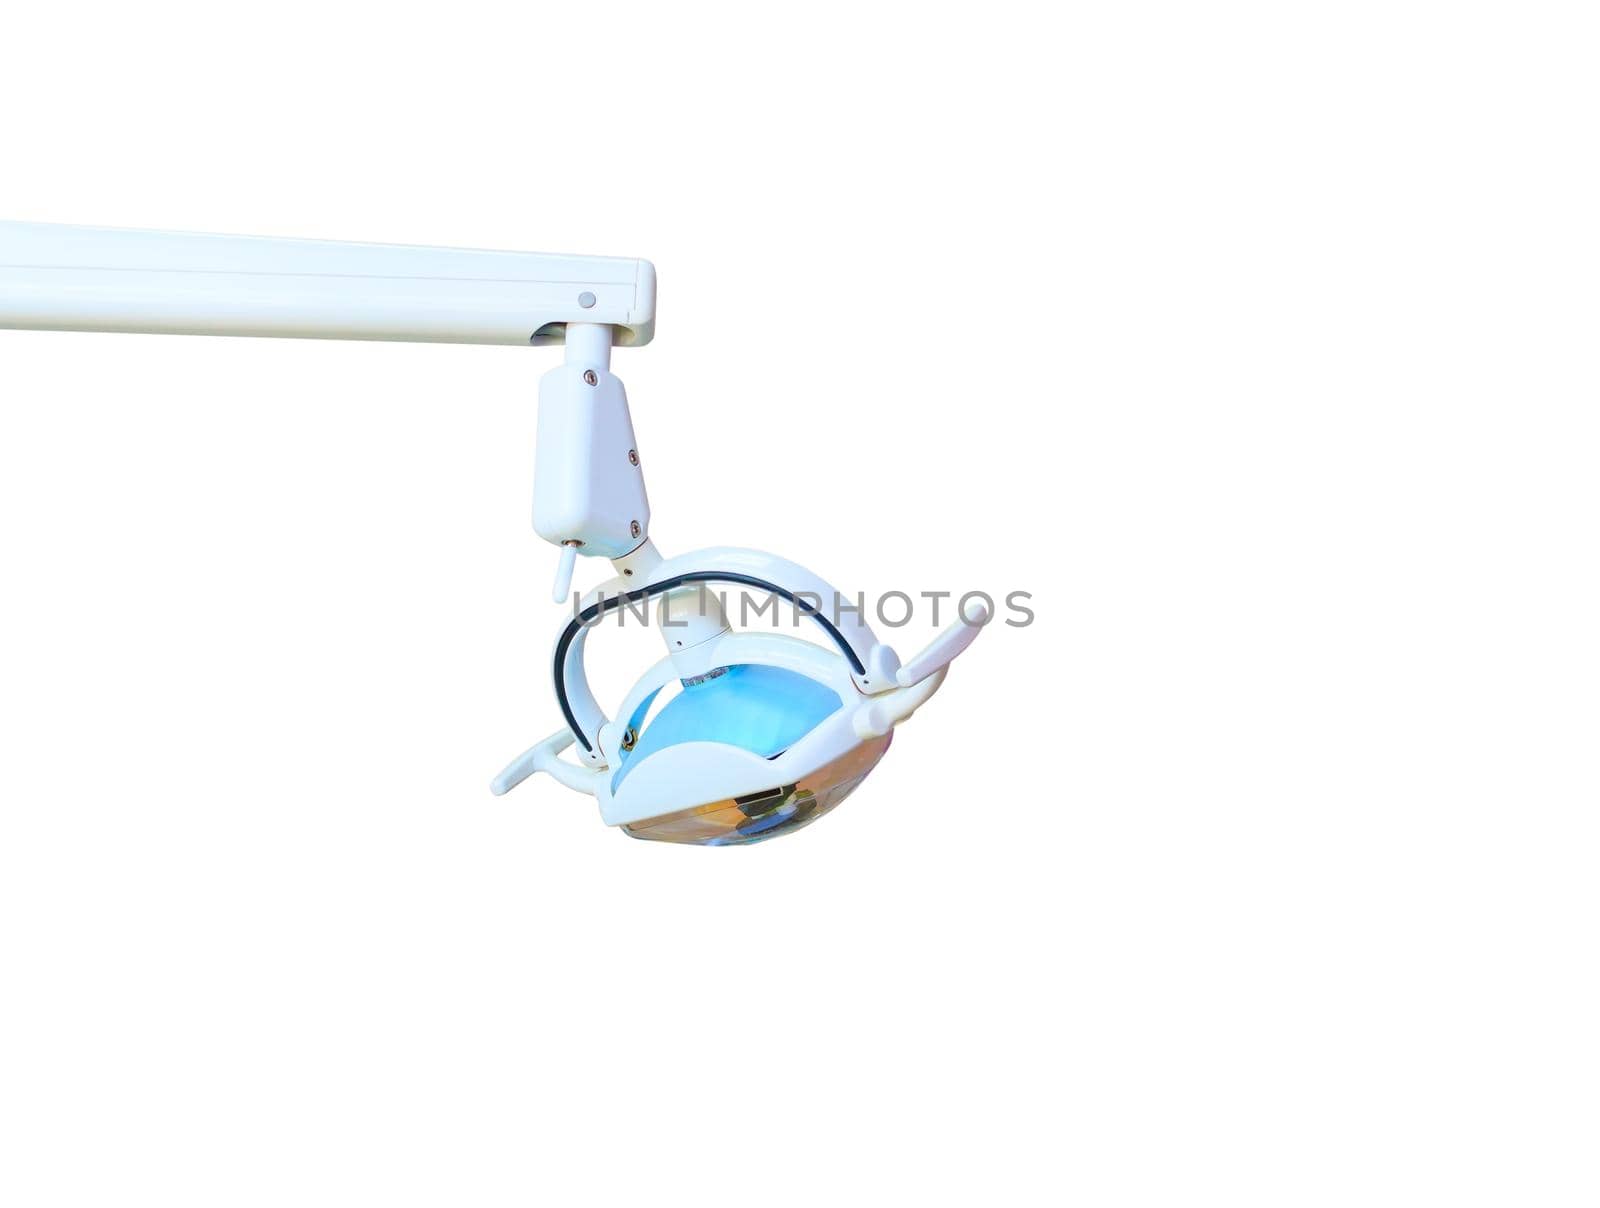 lamp in dental clinic Interior of dentist office health care and medicine with clipping path isolated on white background